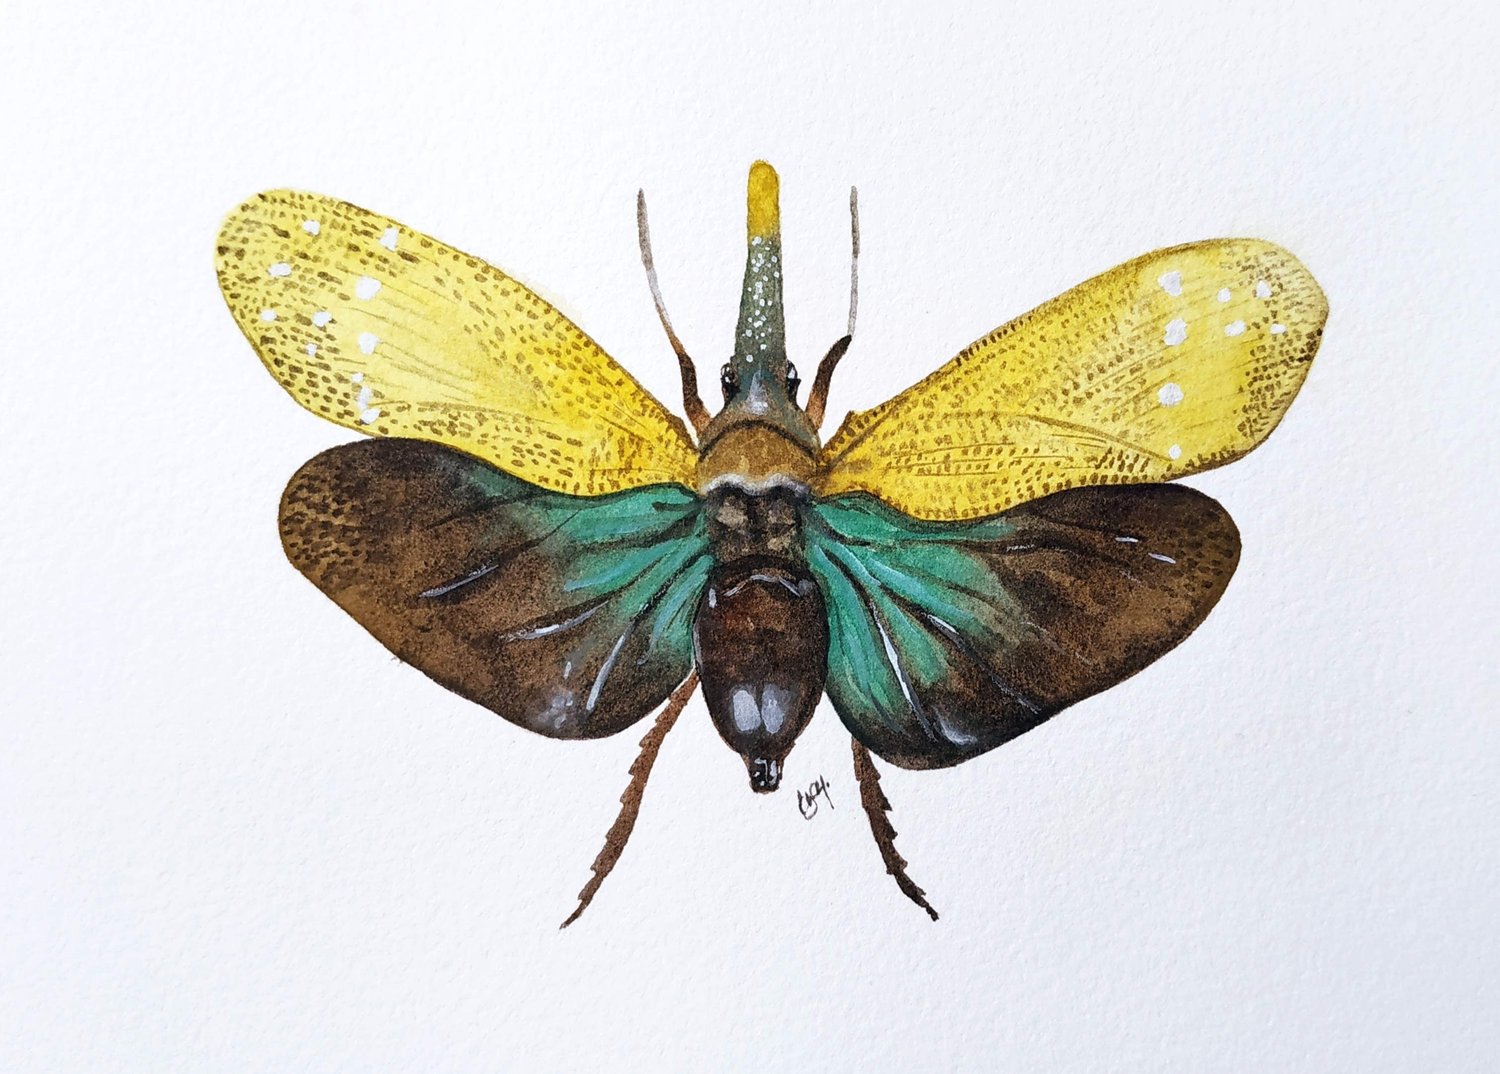 Image of Yellow Lanternfly Watercolor Illustration PRINT 